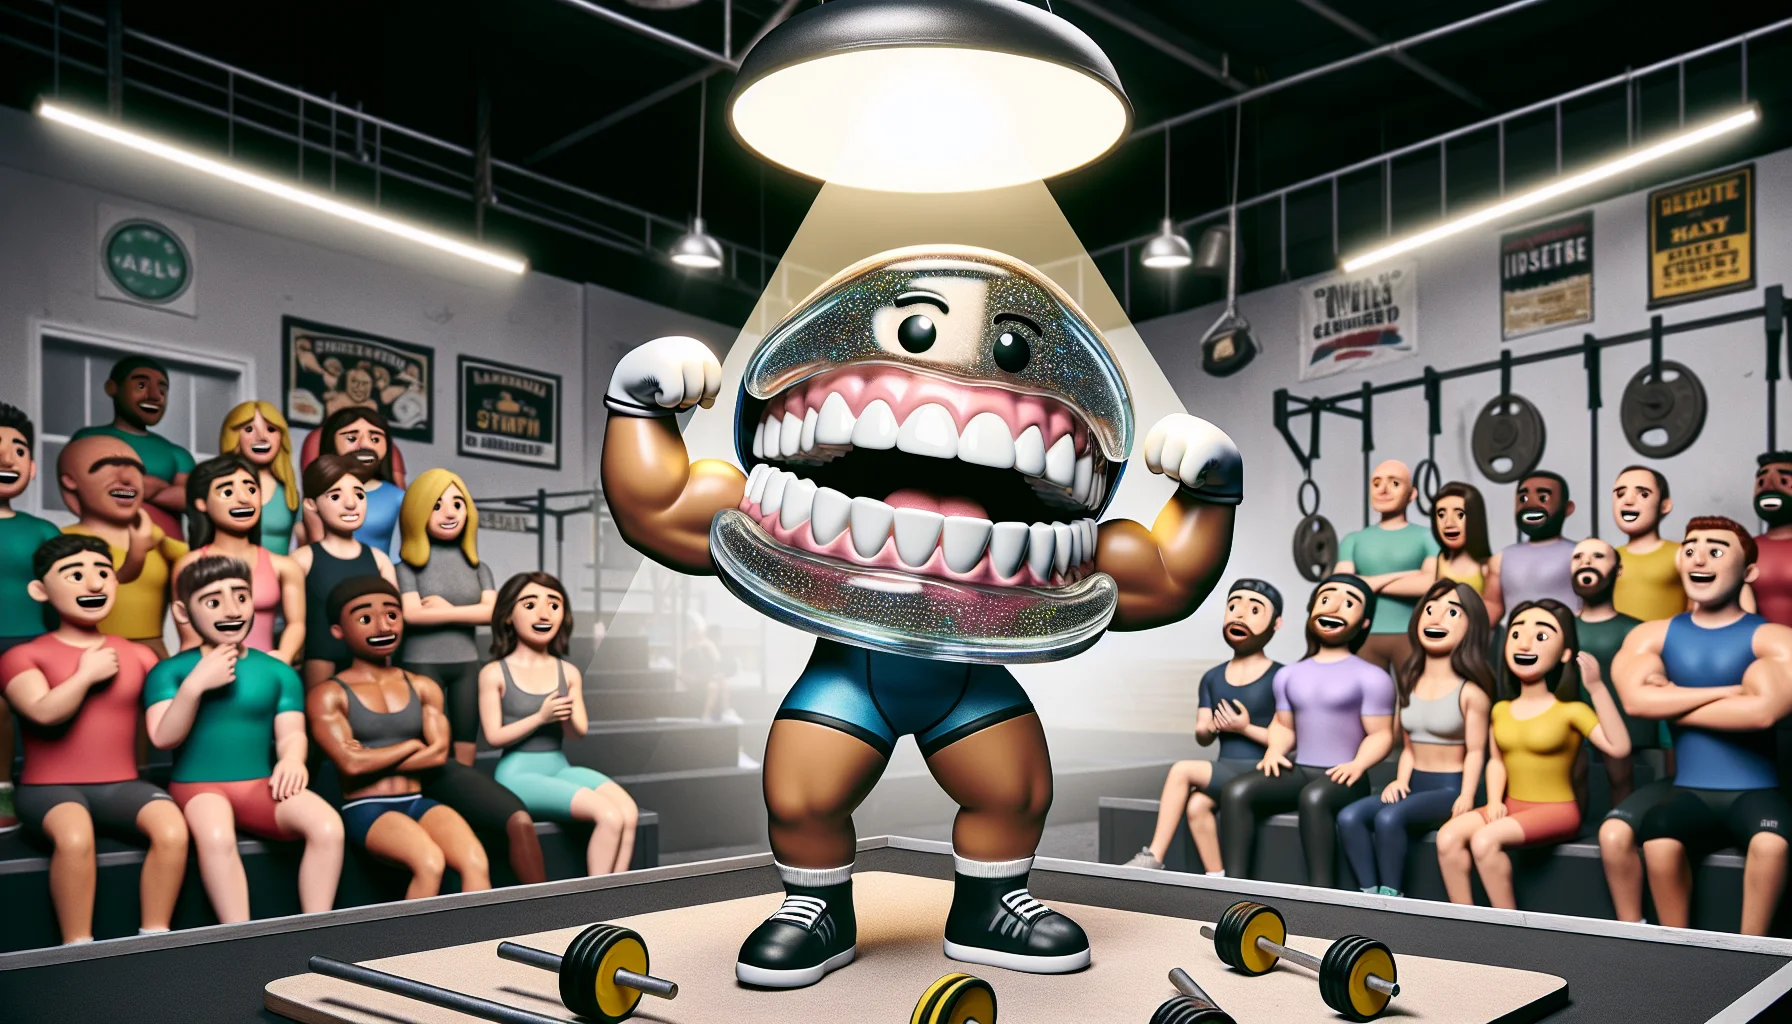 Imagine a comedic scenario alluding to the world of powerlifting. In the center, there's a shiny powerlifting mouthguard, oversized and exuding strength. It's under a spotlight with miniature cartoon-style weights beside it. The mouthguard is personified with endearing facial features, flexing muscular arms, and animated by lifting one of the weights. Around this, there are spectators from different descents and genders, their expressions ranging from awe to laughter, fully entertained by the spectacle. The background has a gym setting where different individuals are inspired and exercising with equipment. This is a playful take on promoting fitness culture.